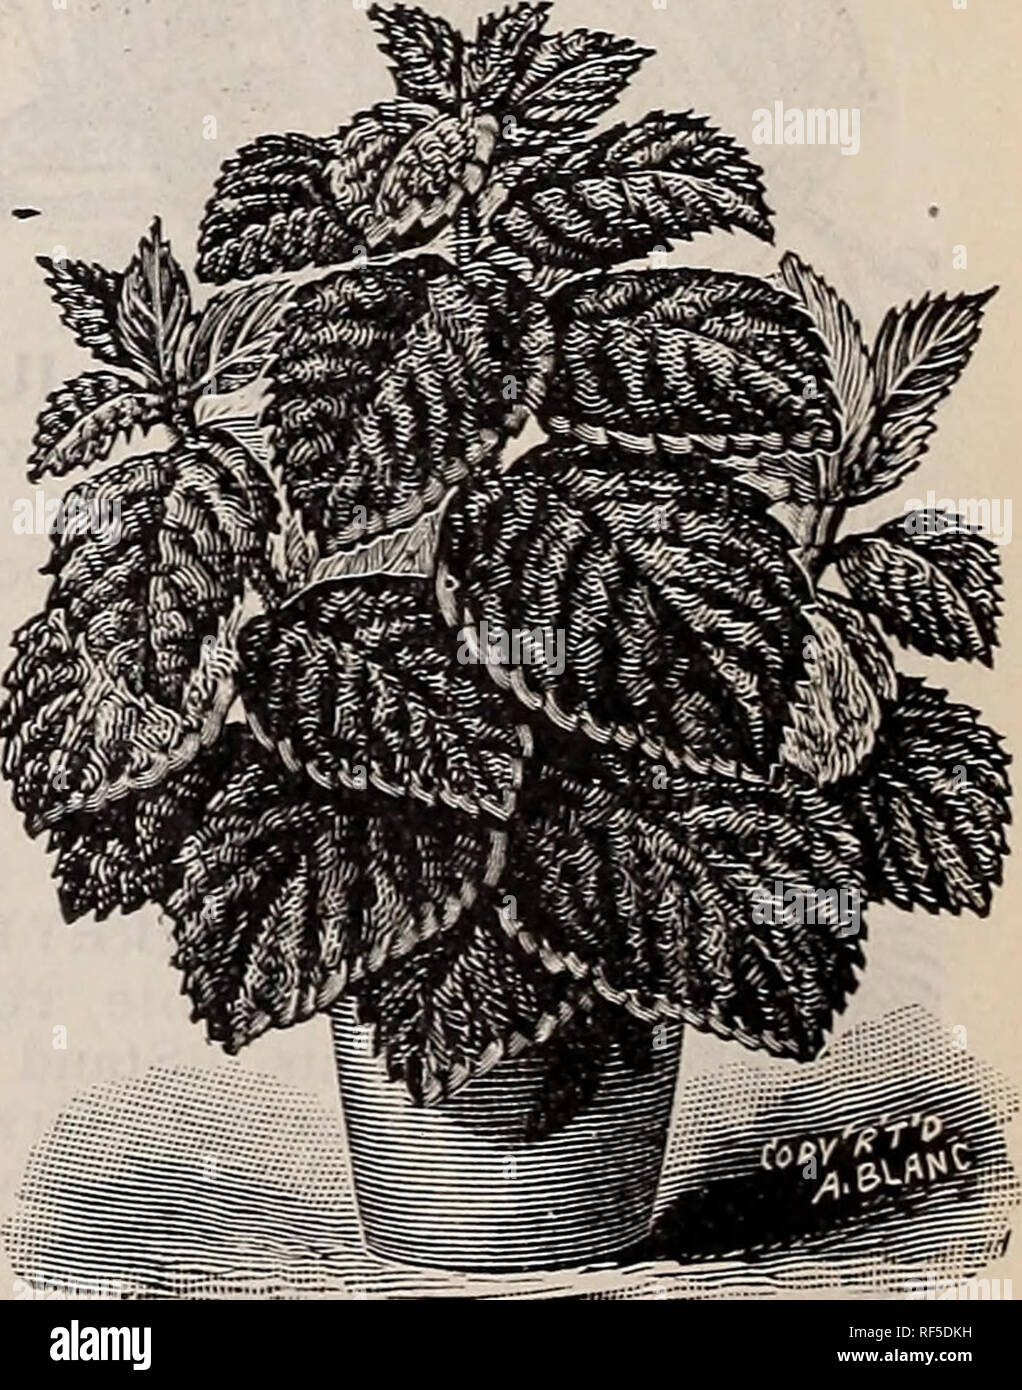 . New and rare plants, bulbs, etc.. Nursery stock, Pennsylvania, Philadelphia, Catalogs; Plants, Ornamental, Catalogs; Flowers, Catalogs; Shrubs, Catalogs. Royal Coleus. ROYAL COLEUS. Messrs. Sander &amp; Co.'s latest and best English Novelties sent out at $1 and $2 each, such as Prince Albert Edward, Golden King, Fascinator, Green and Gold, Mrs. Sander. These represent a most bewildering array of colors. Also the New Coleus, Klondike, the various colors of which are beyond description. All at 15 cents each ; the h for 70 cents. GYNURA AURANTIACA. Purple Velvet Plant seems an appropri- ate nam Stock Photo